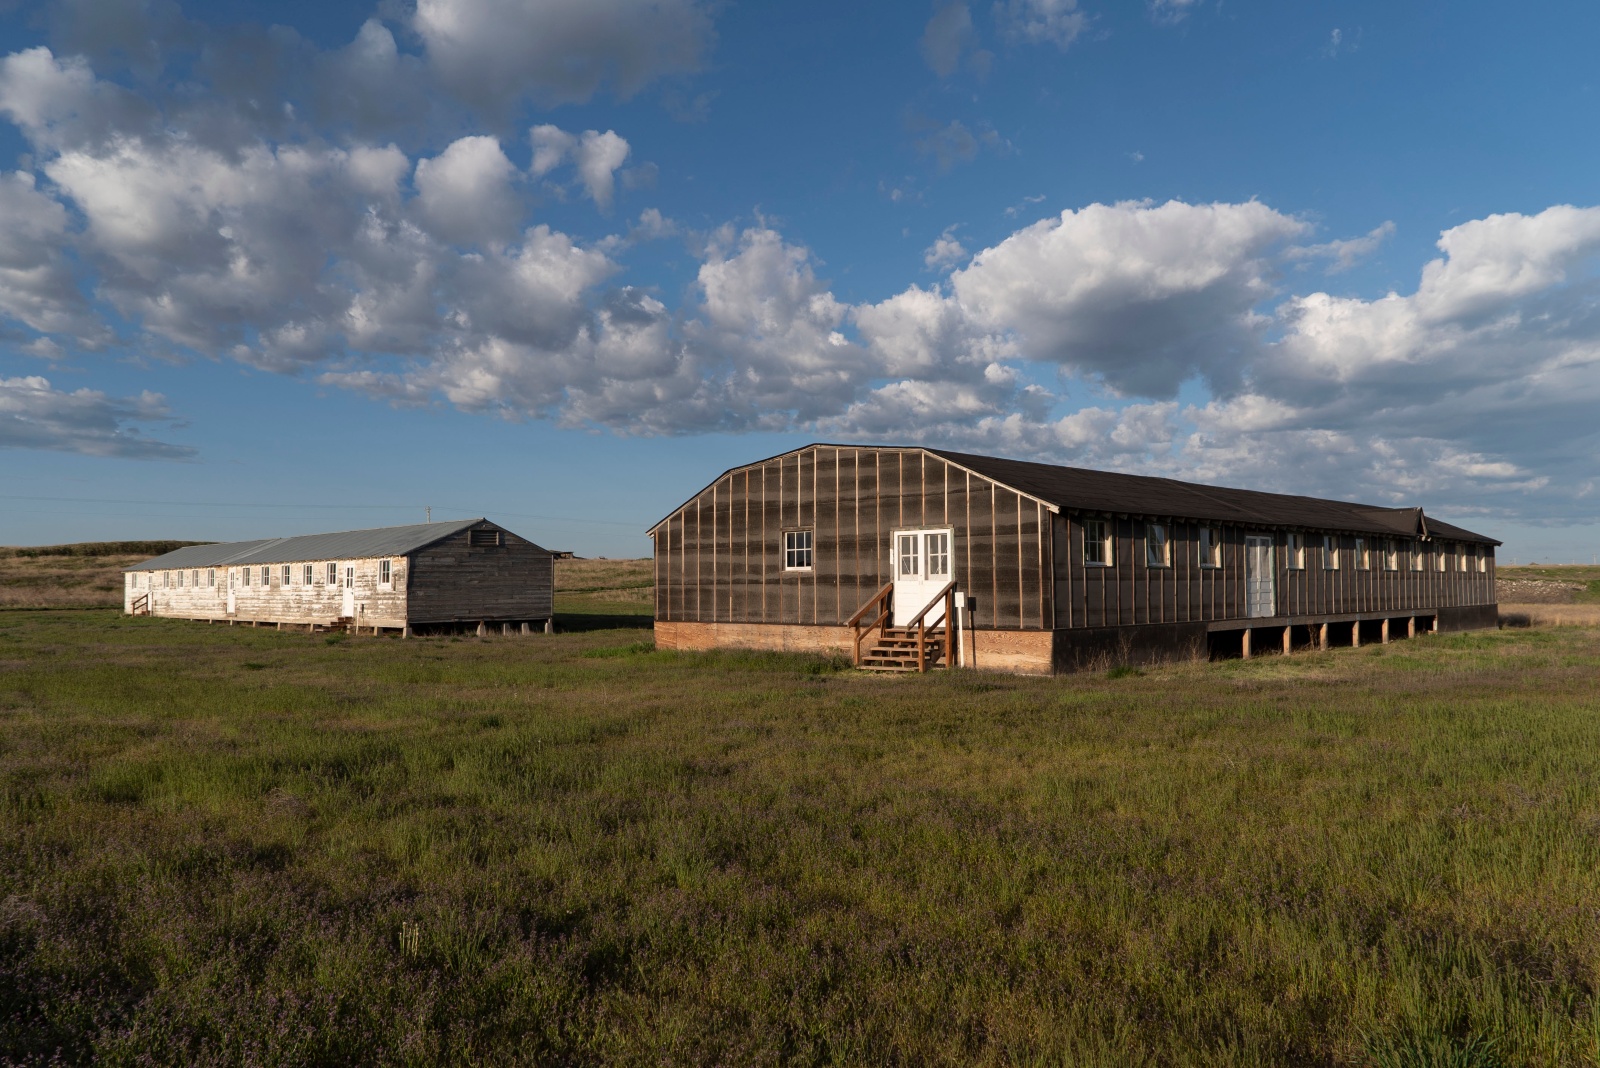 Two low, long buildings in an open grassy plain. There are clouds and a wide horizon surrounding the buildings.